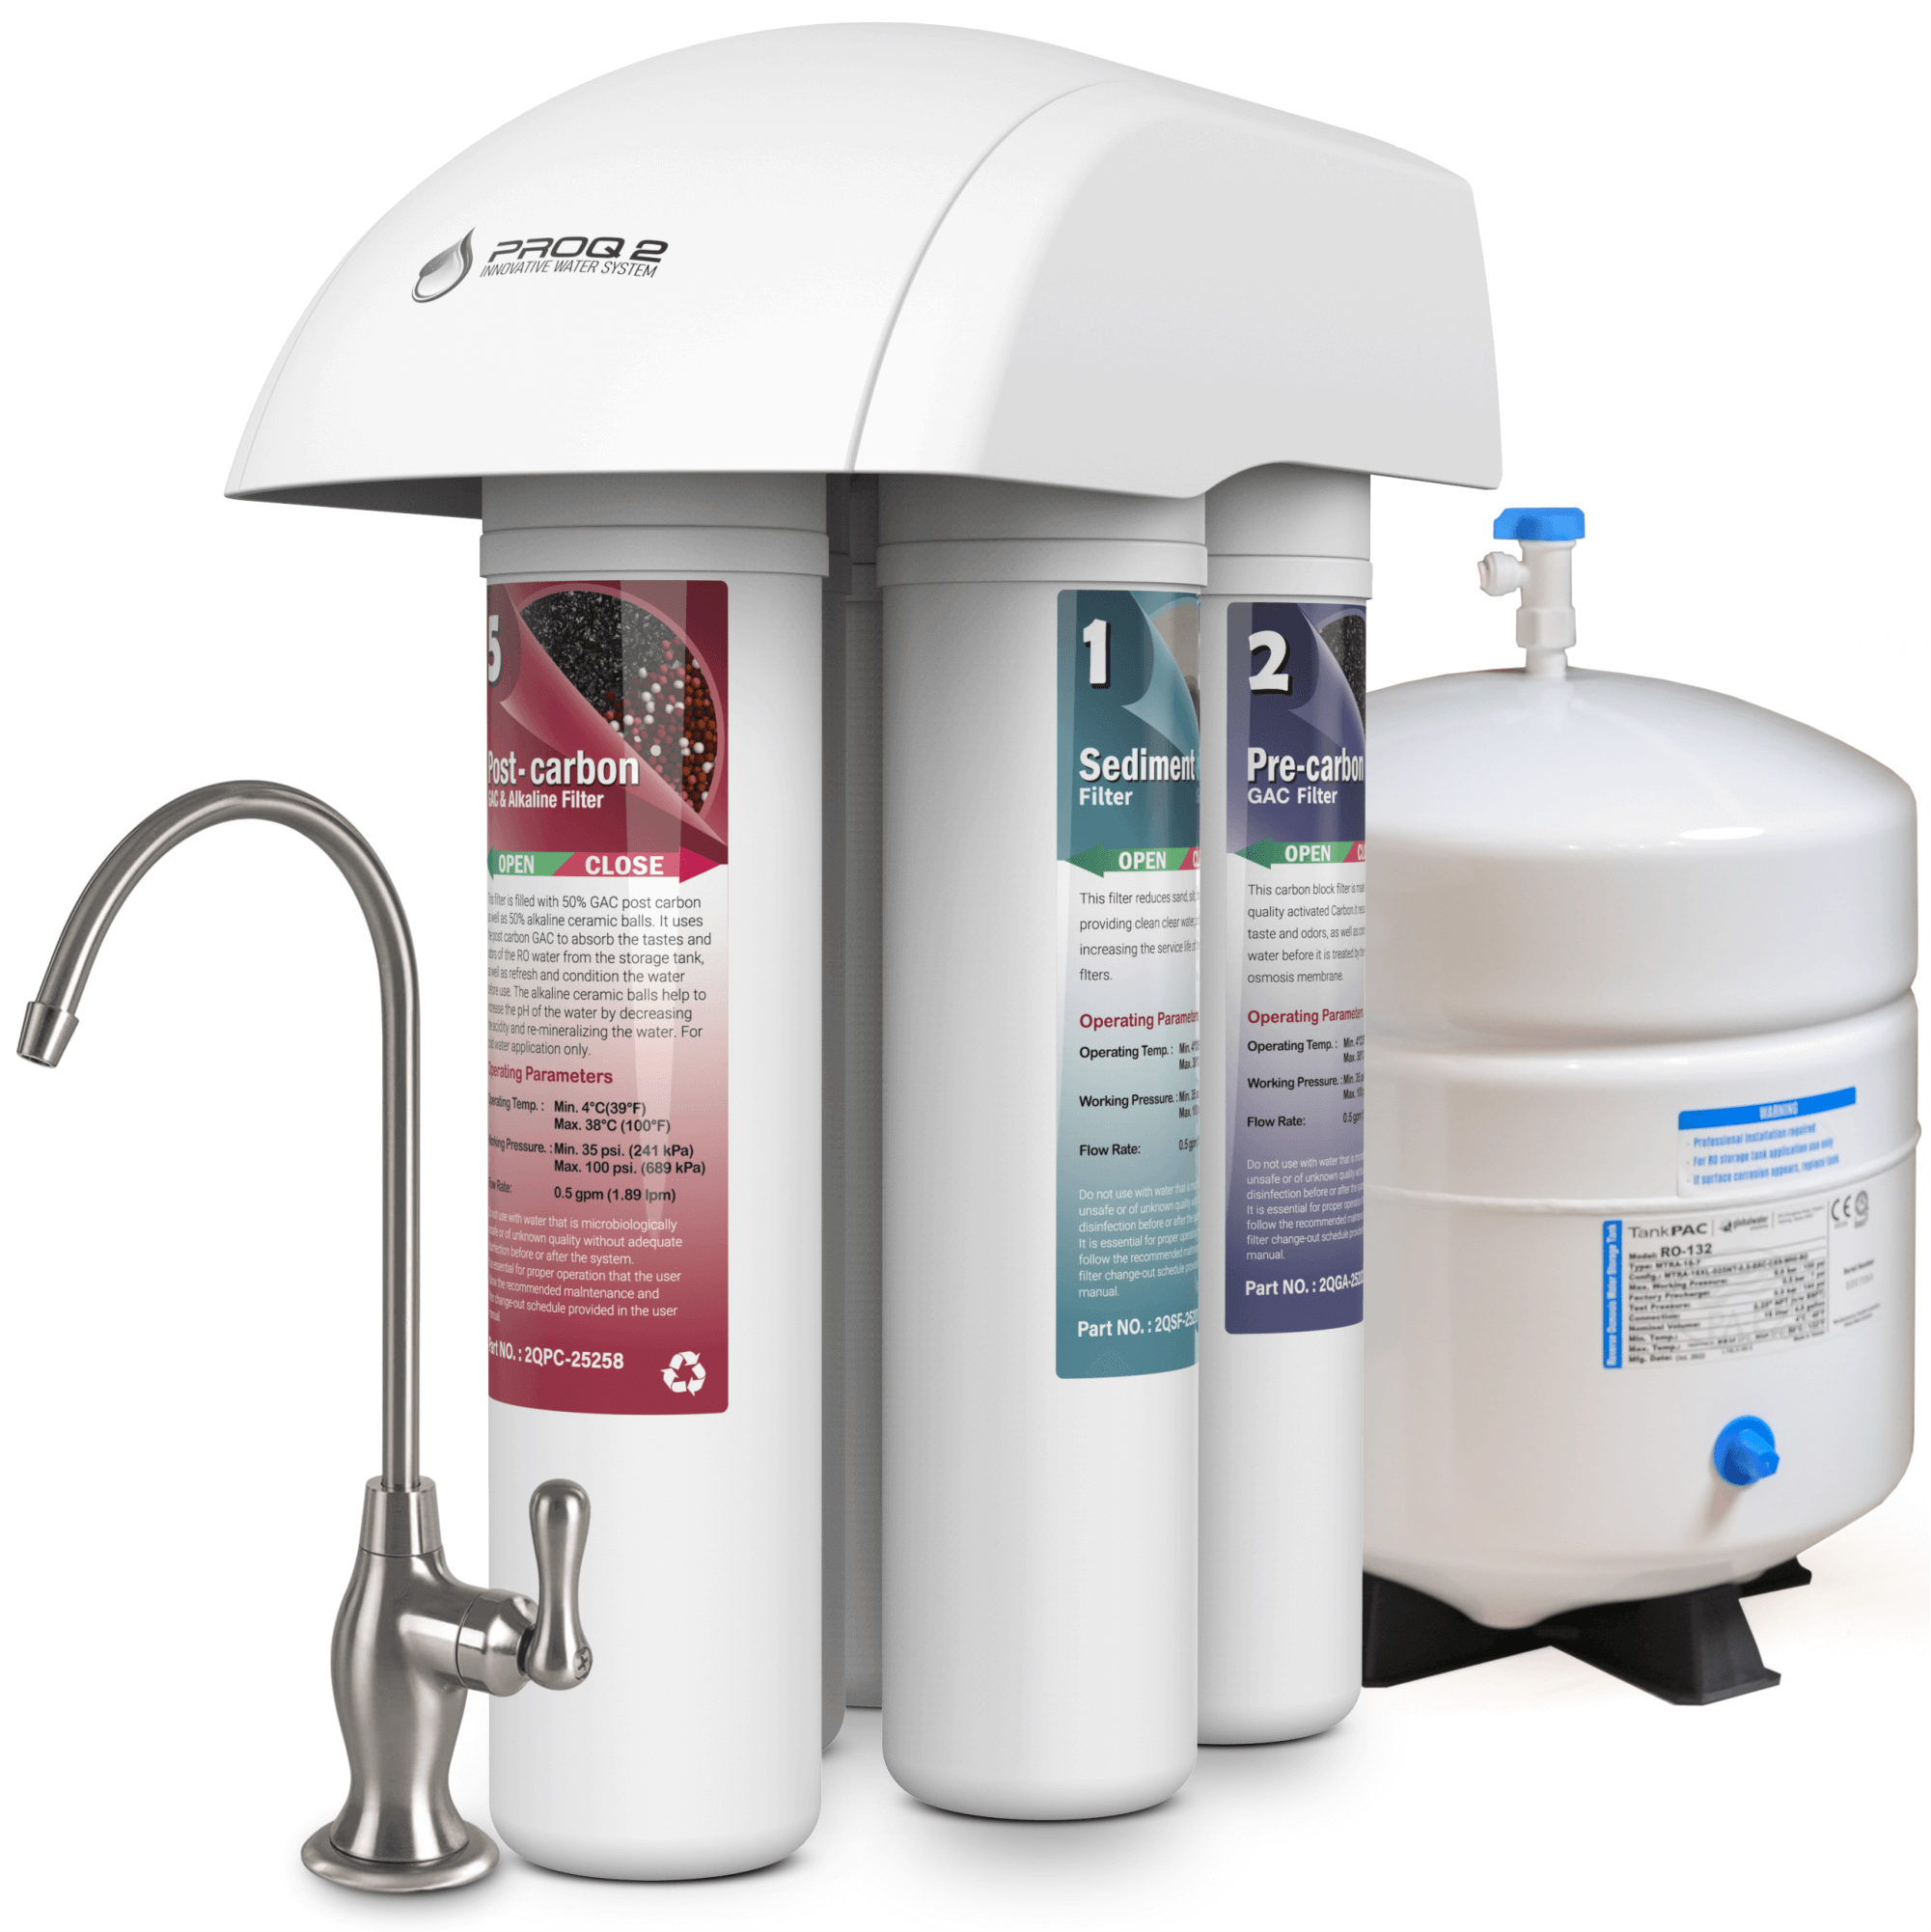 GWS PROQ2 Alkaline Reverse Osmosis System Under Sink, 5 Stage RO w/ Brushed Nickel Faucet and RO Tank, pH+ Alkaline Water Filter for Essential Minerals, Quick Change Water Filter for Sink, 50GPD